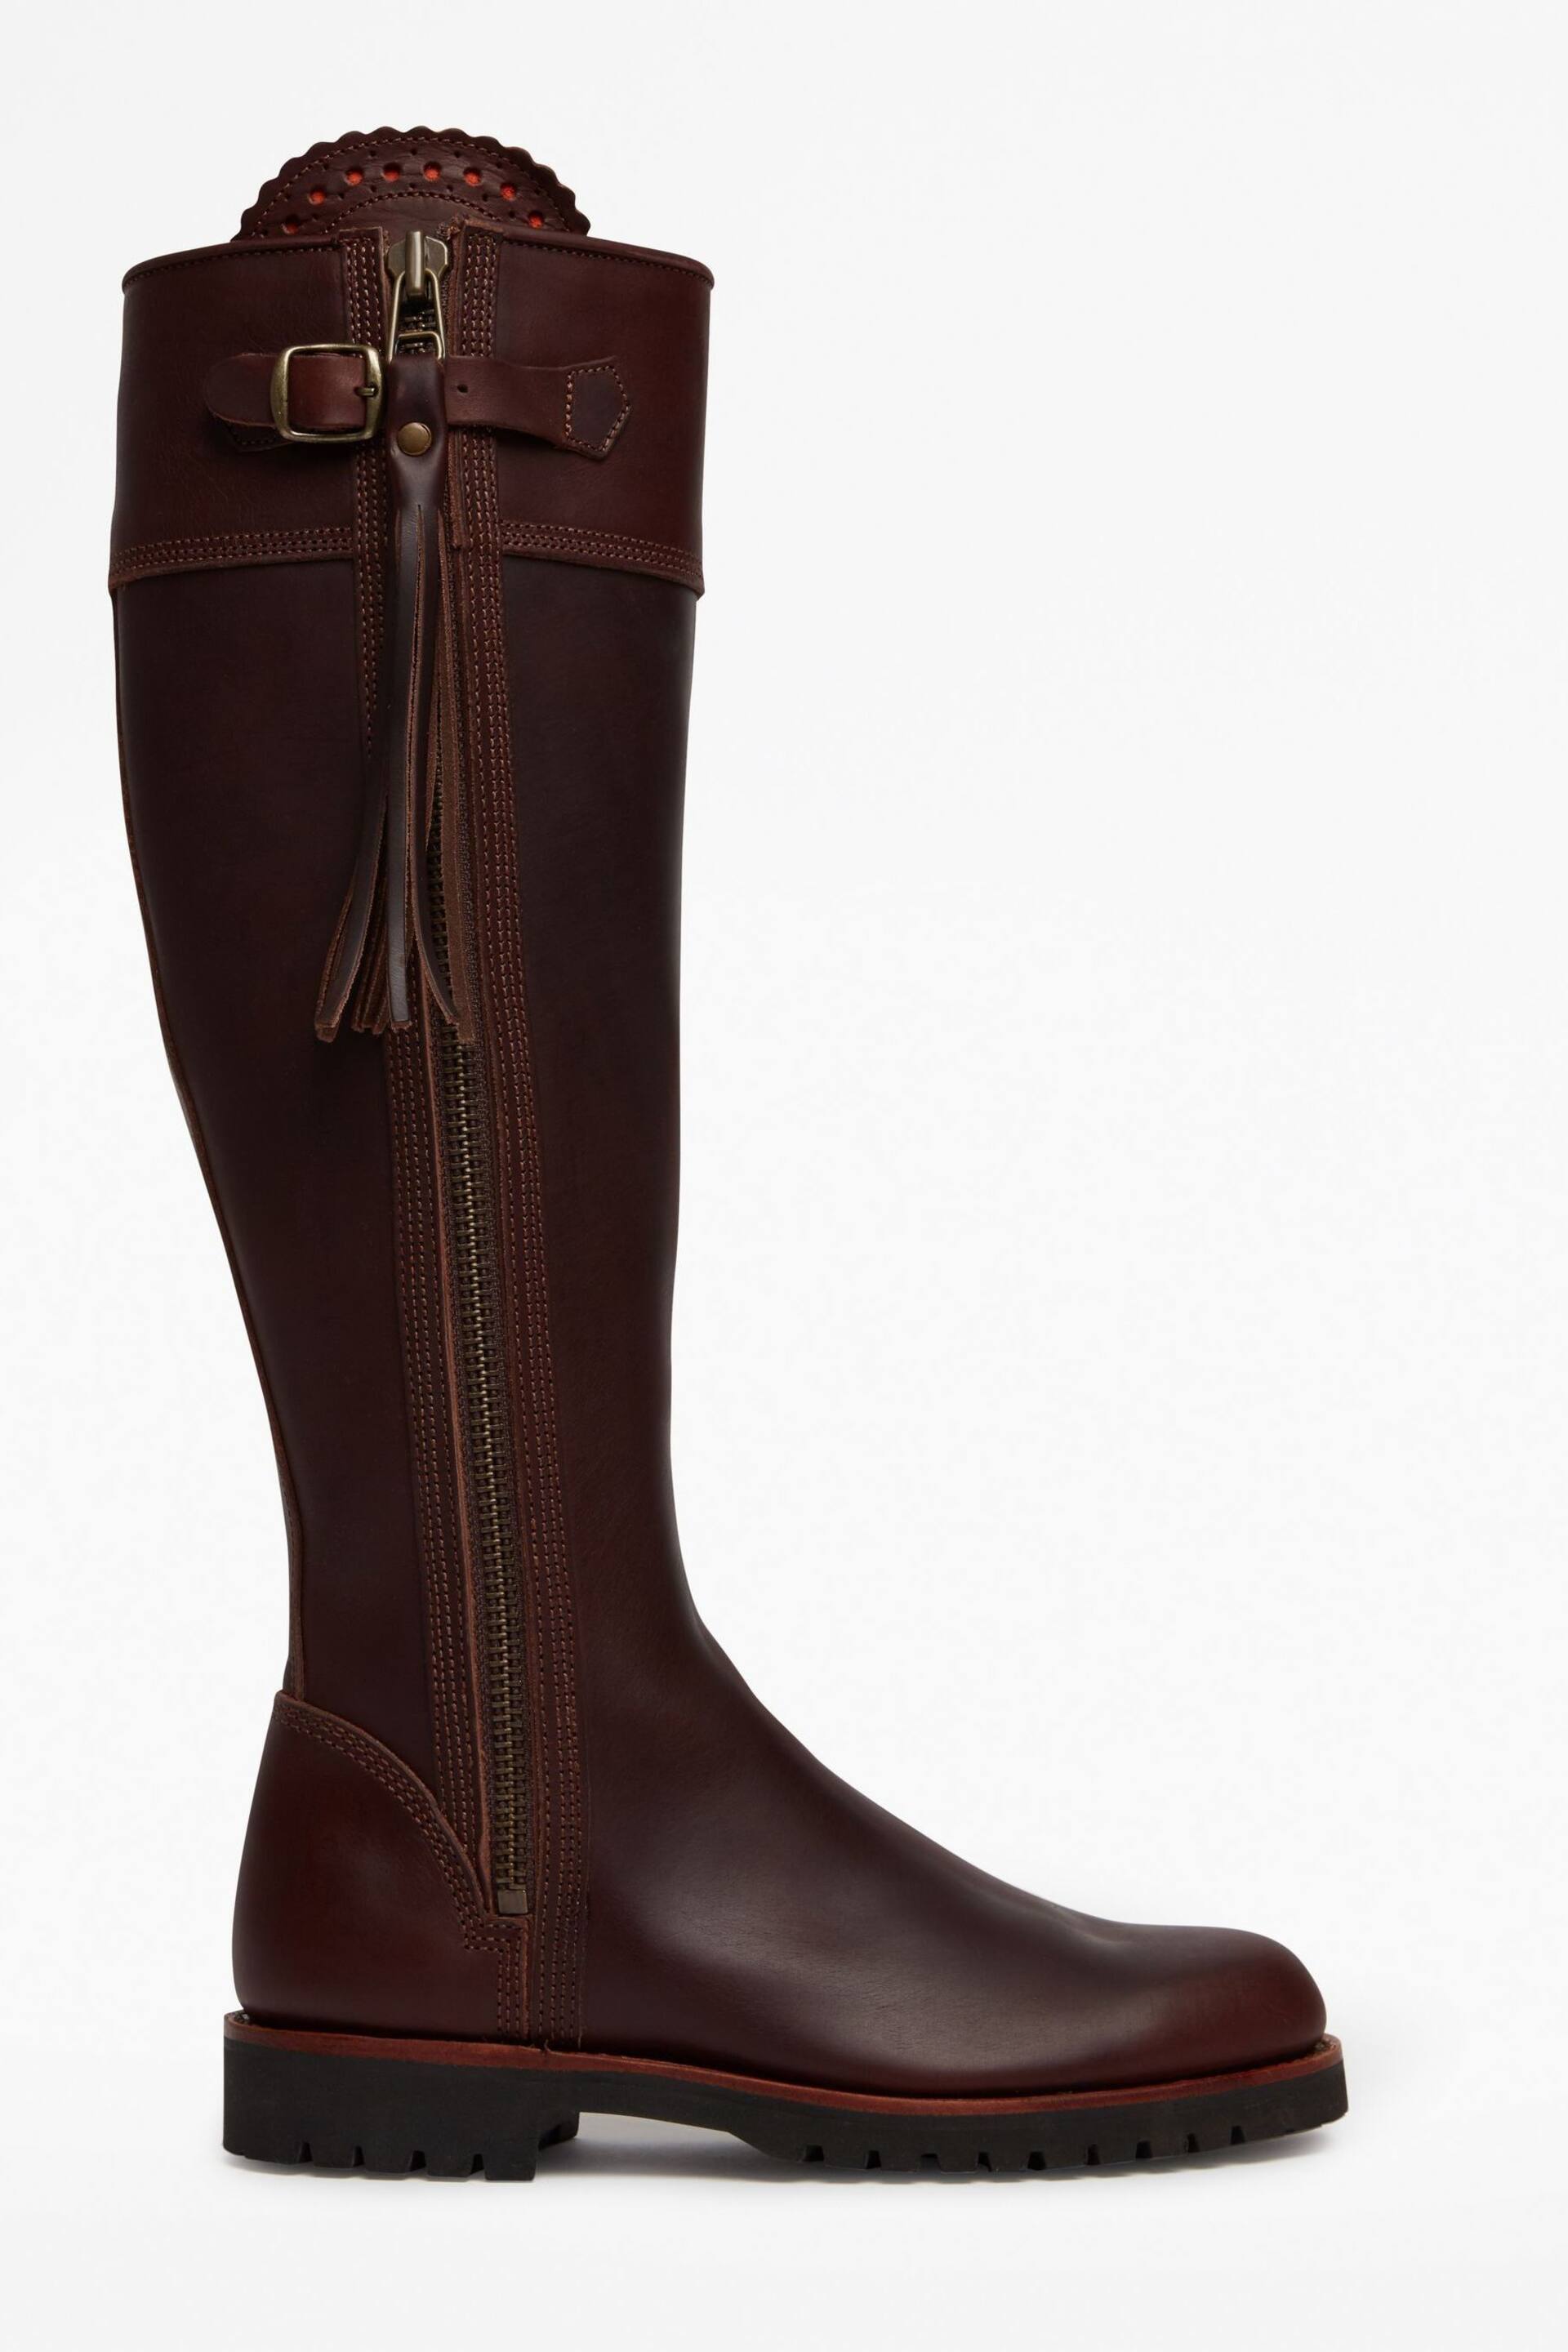 Penelope Chilvers Long Tassel Boots - Image 2 of 5